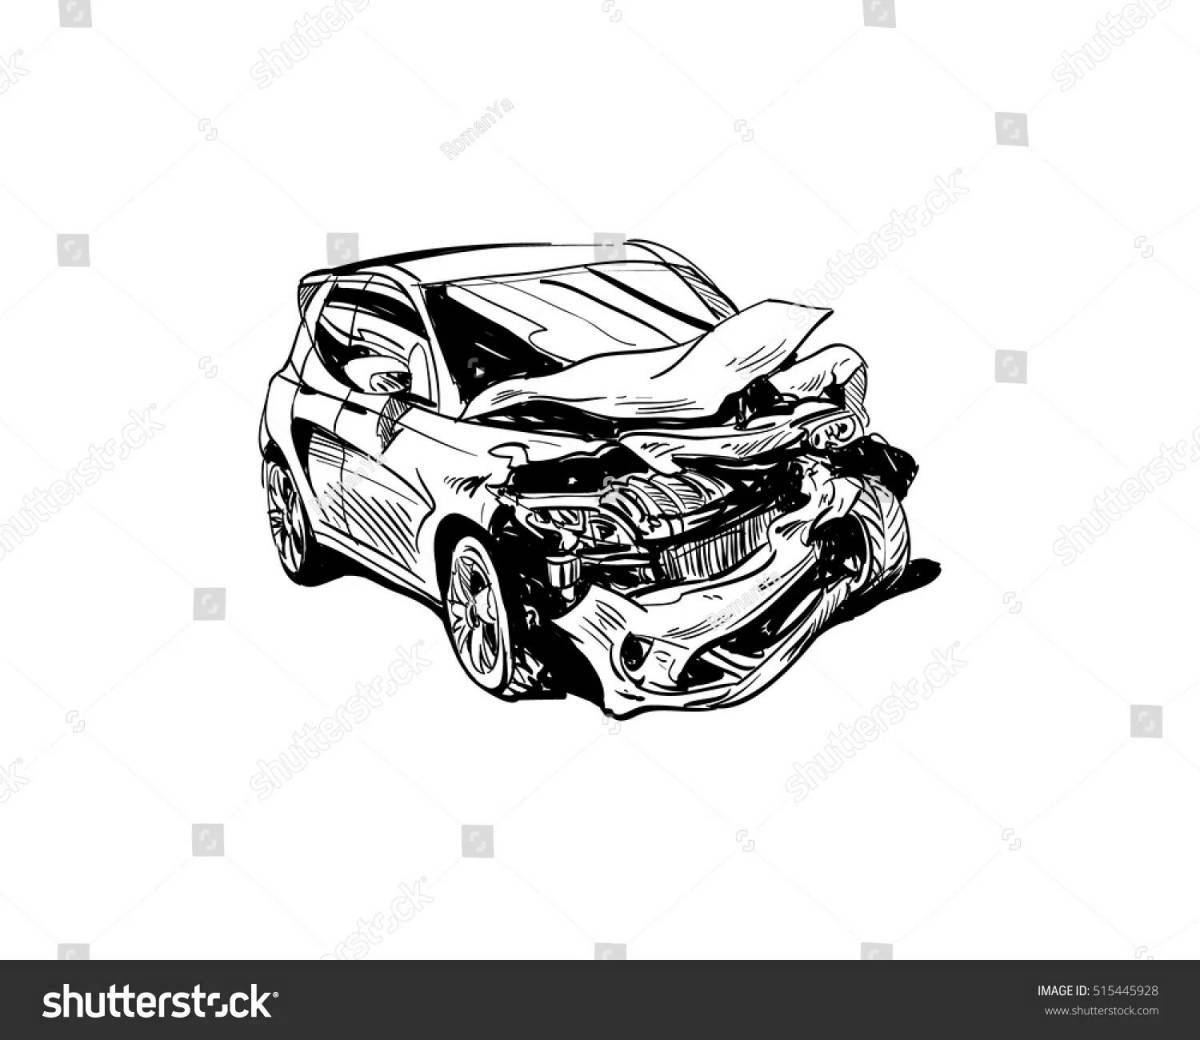 Coloring book bright car accident